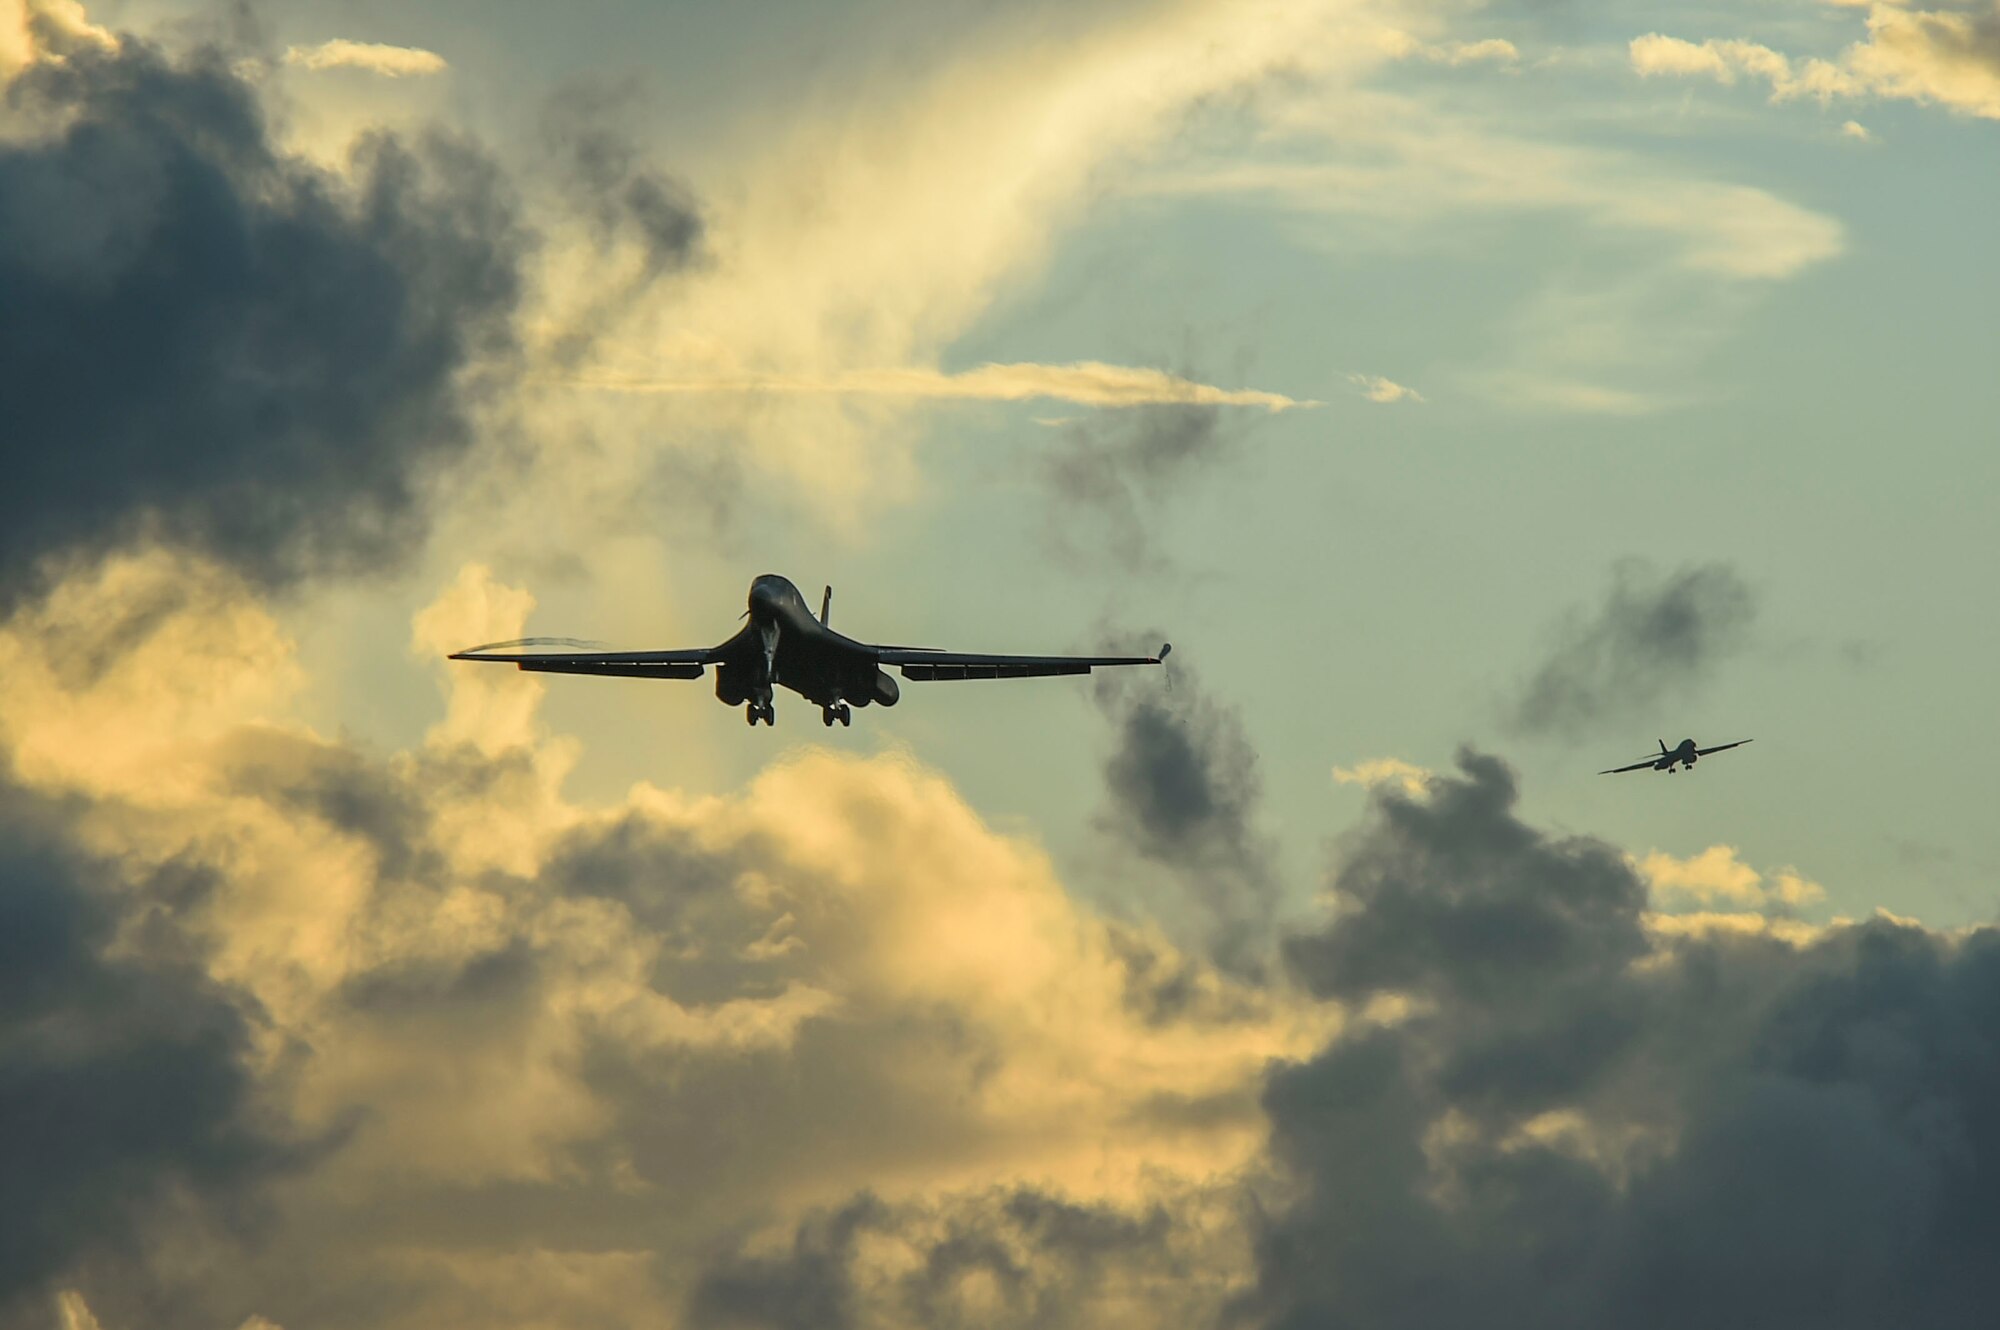 Two B-1B Lancer aircraft prepare to land during a Bomber Task Force deployment at Andersen Air Force Base, Guam, Oct. 21, 2020.